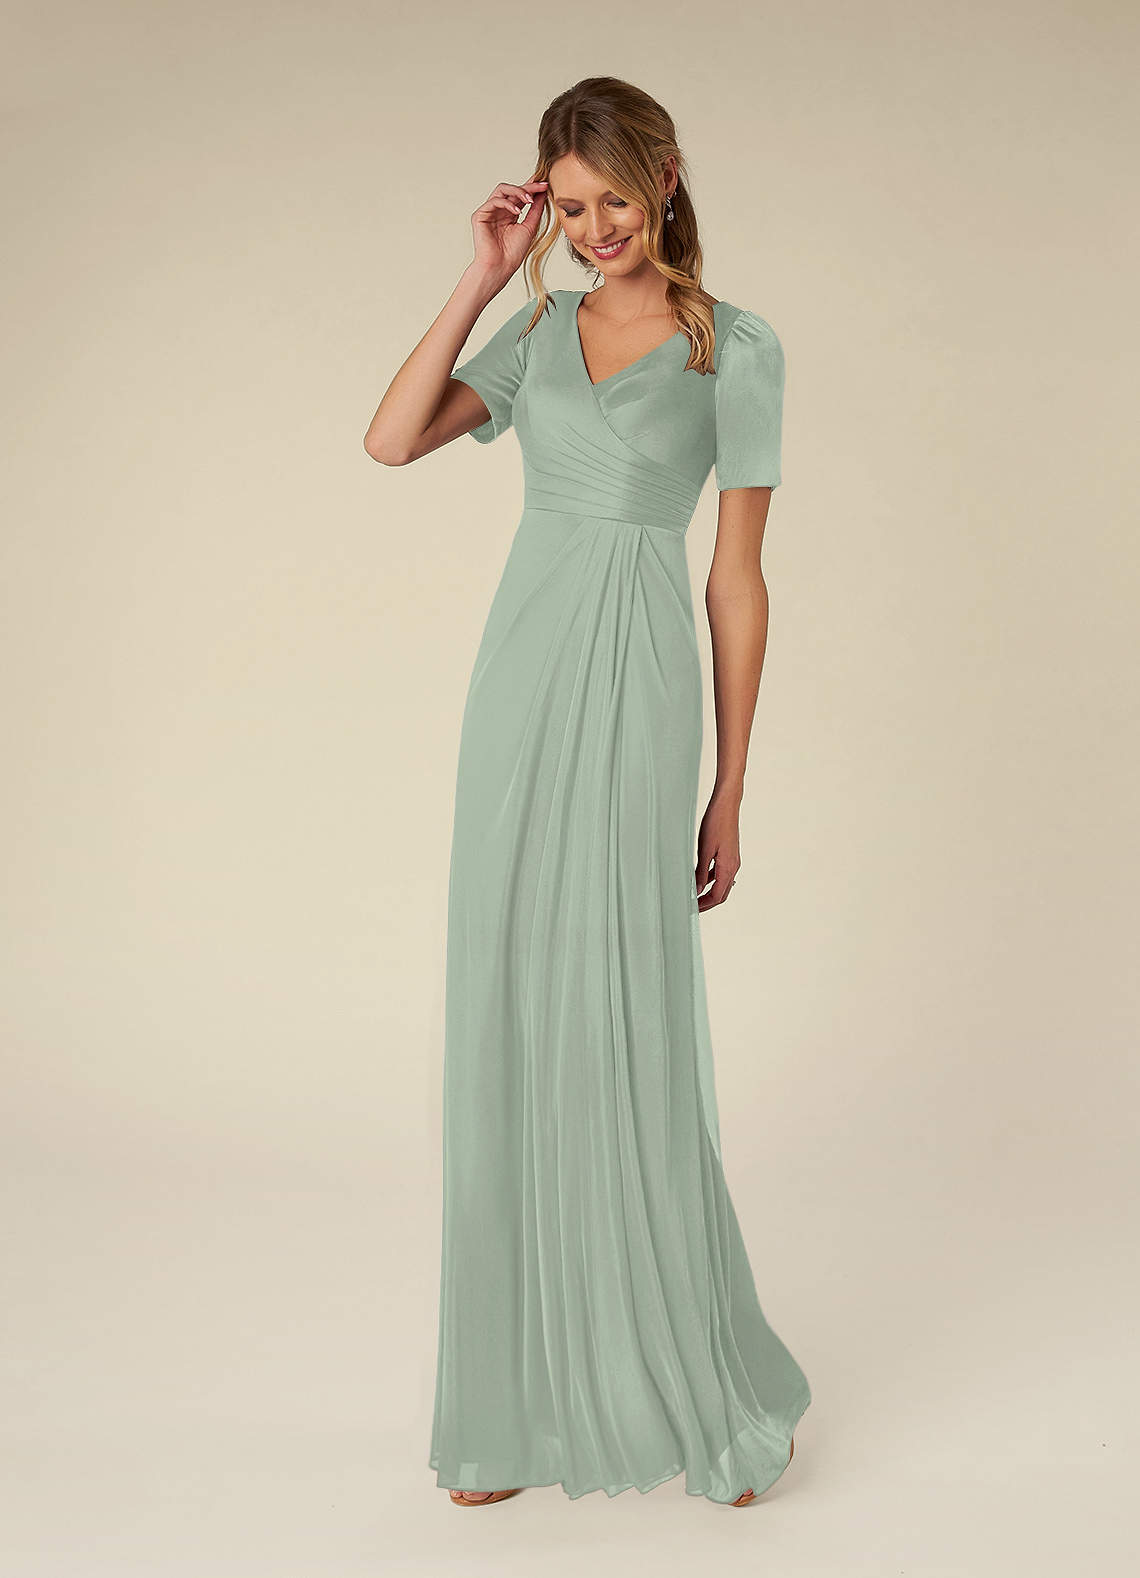 Azazie Bessie Mother of the Bride Dresses A-Line Pleated Mesh Floor-Length Dress image1